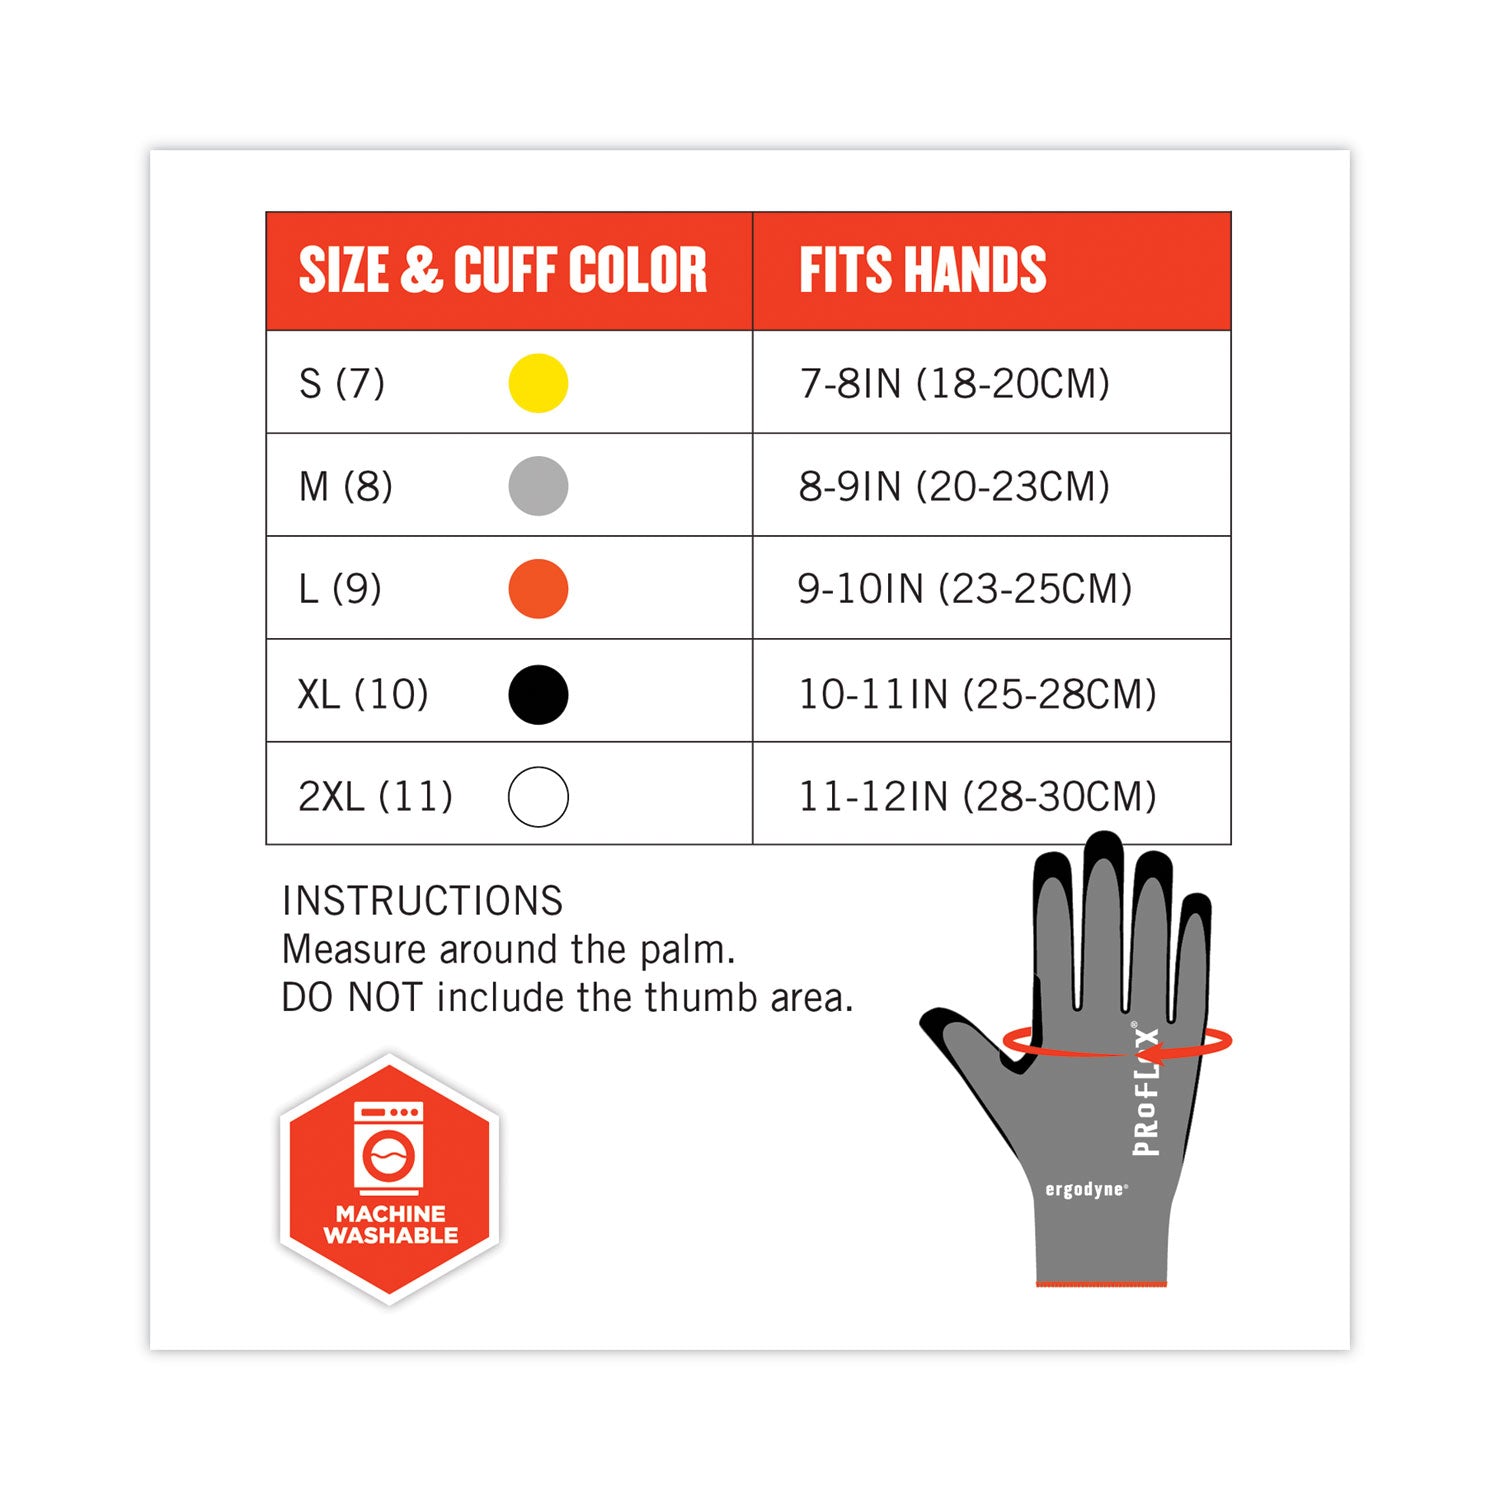 proflex-7072-ansi-a7-nitrile-coated-cr-gloves-gray-2x-large-pair-ships-in-1-3-business-days_ego10316 - 7